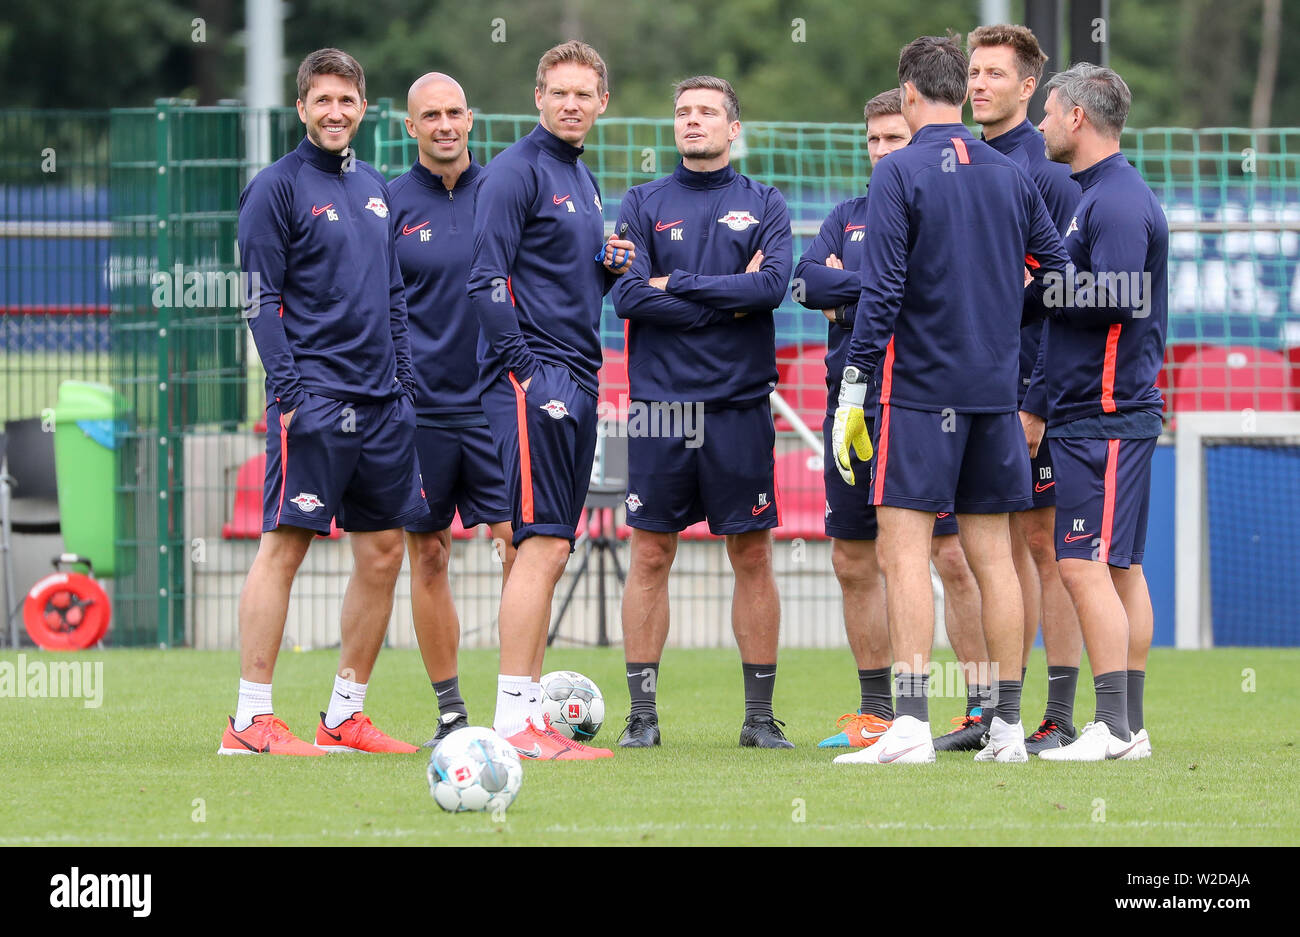 08 July 2019, Saxony, Leipzig: Soccer: Bundesliga, RB Leipzig. The new coach Julian Nagelsmann (3rd from left) and his trainer team Benjamin Glück, video analyst (l-r), Ruwen Faller, athletics coach, Robert Klauss, co-trainer, Moritz Volz, co-trainer, Daniel Behlau, athletics coach, Kai Kraft, athletics coach and Frederik Gössling, goalkeeper coach, are on the pitch after the first training session. Photo: Jan Woitas/dpa-Zentralbild/dpa - IMPORTANT NOTE: In accordance with the requirements of the DFL Deutsche Fußball Liga or the DFB Deutscher Fußball-Bund, it is prohibited to use or have used Stock Photo